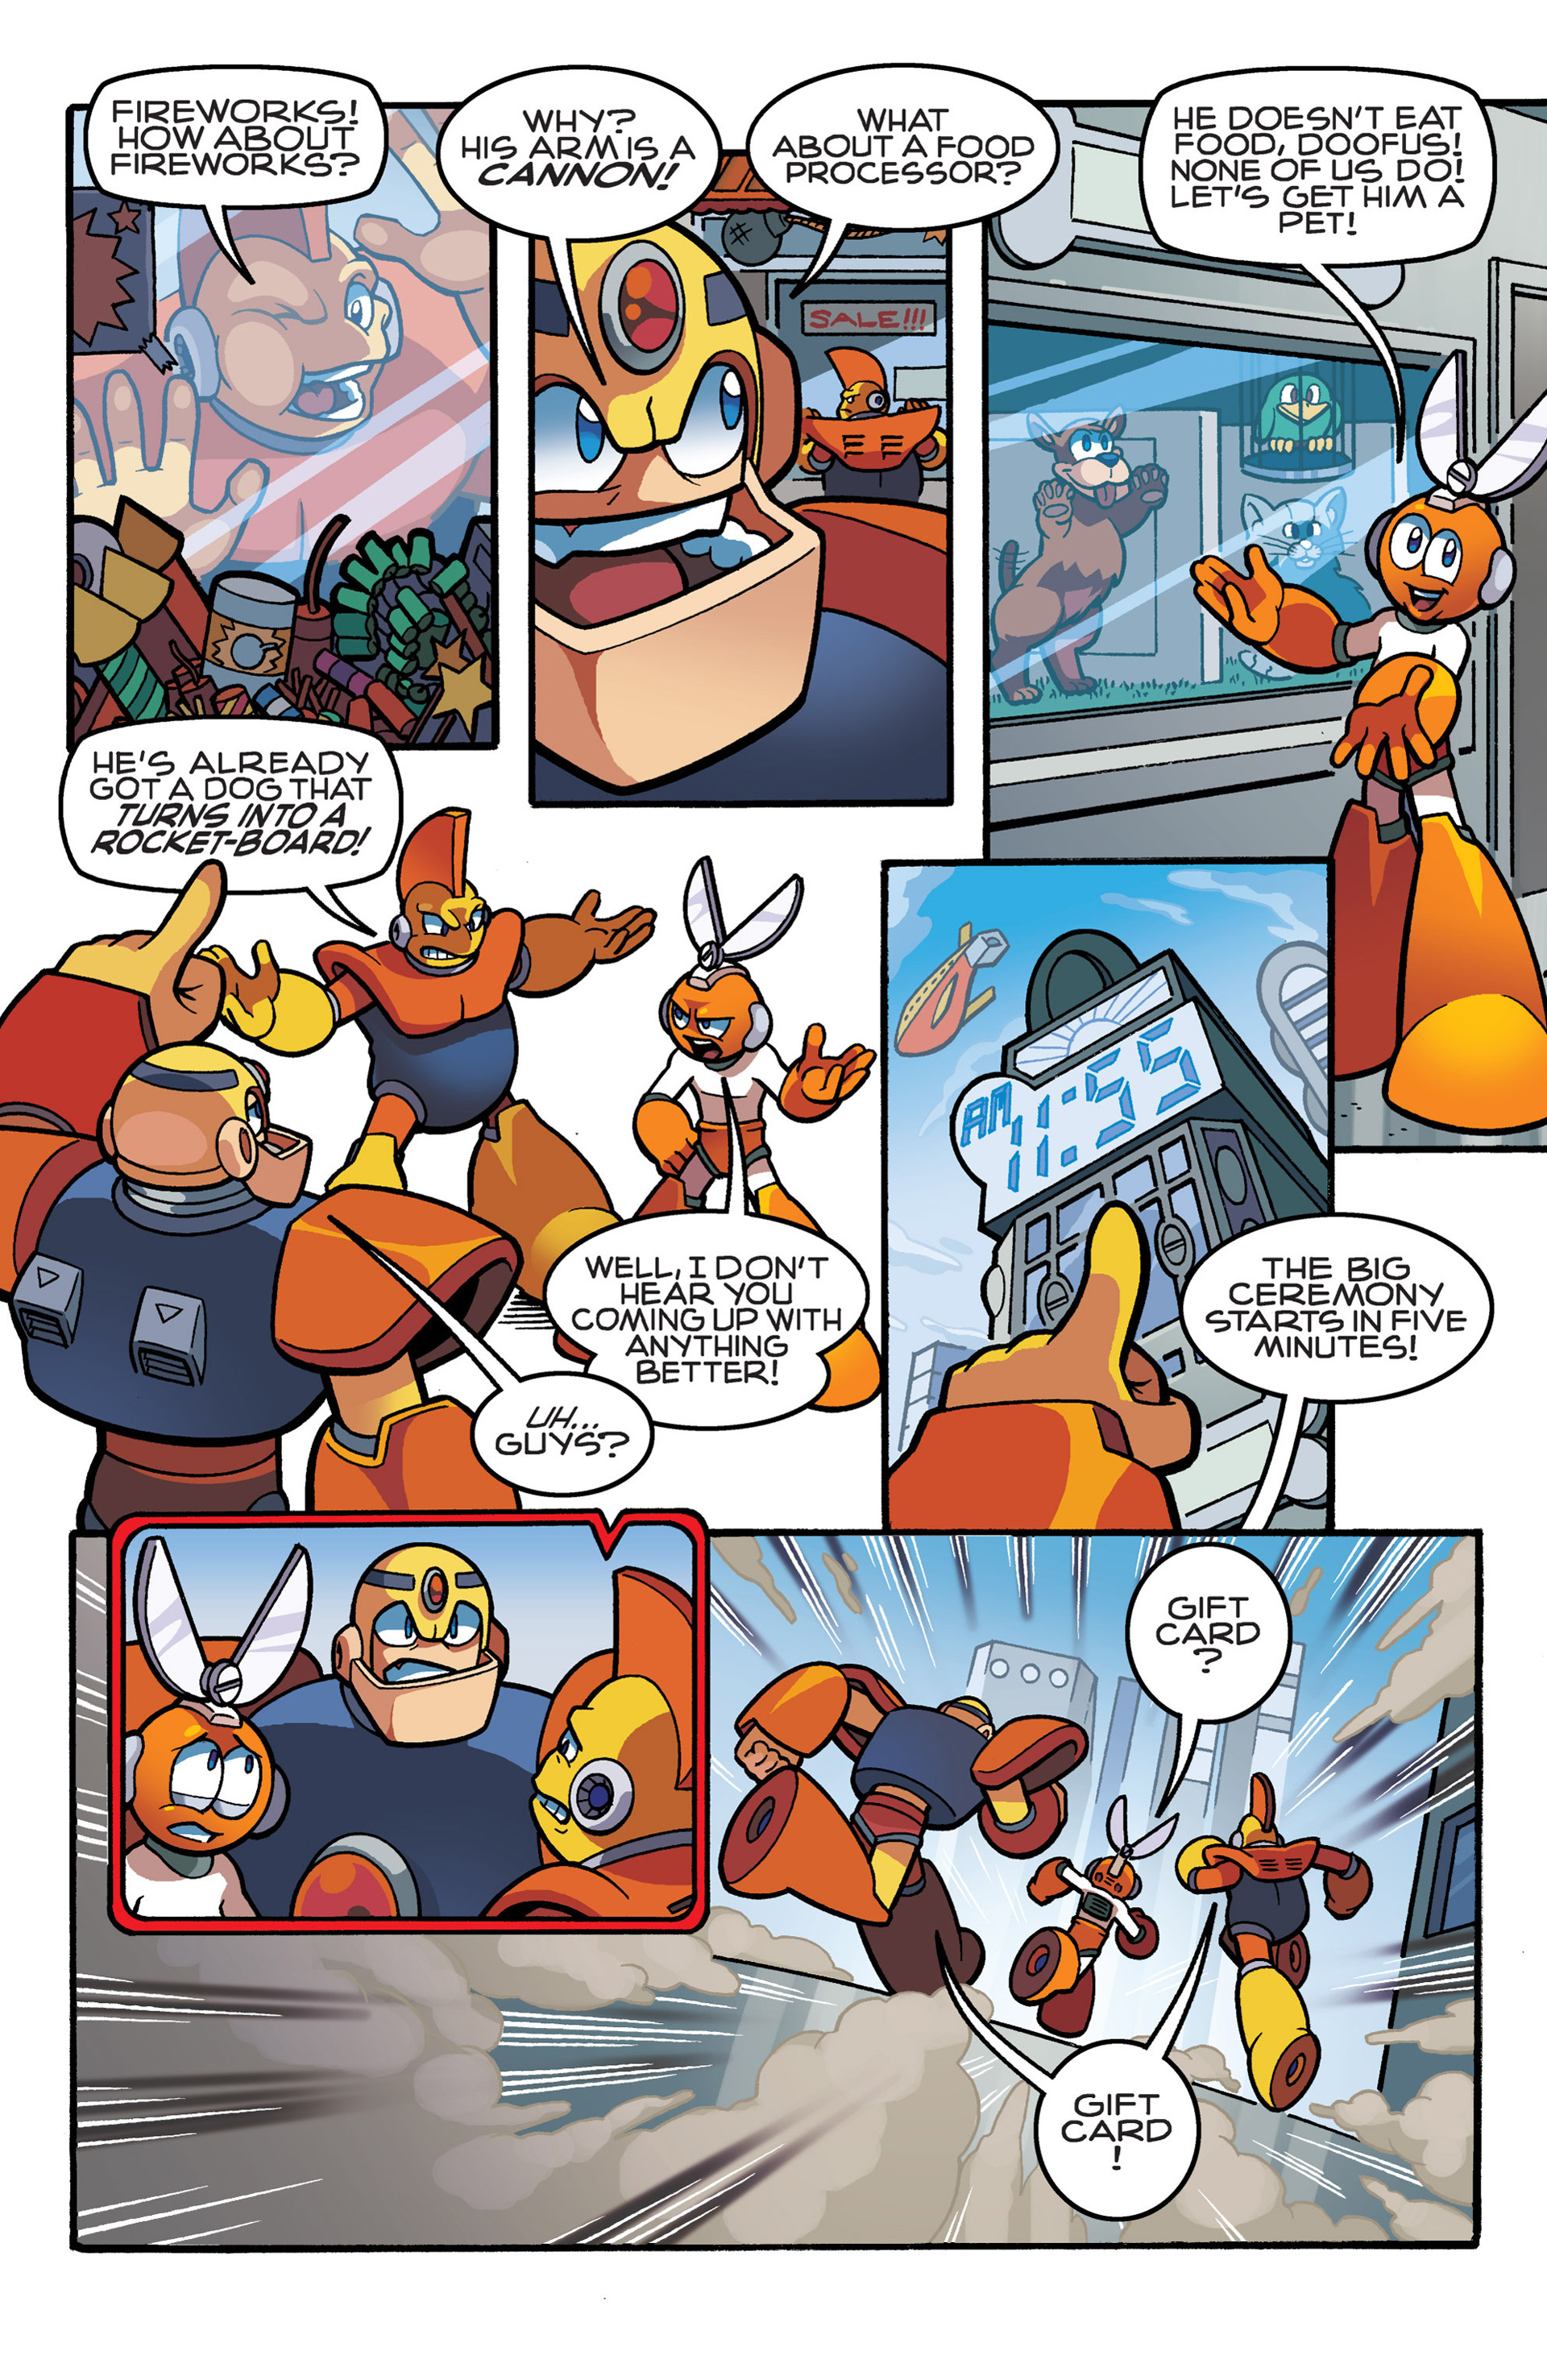 Mega Man Issue 23 | Read Mega Man Issue 23 comic online in high quality.  Read Full Comic online for free - Read comics online in high quality .